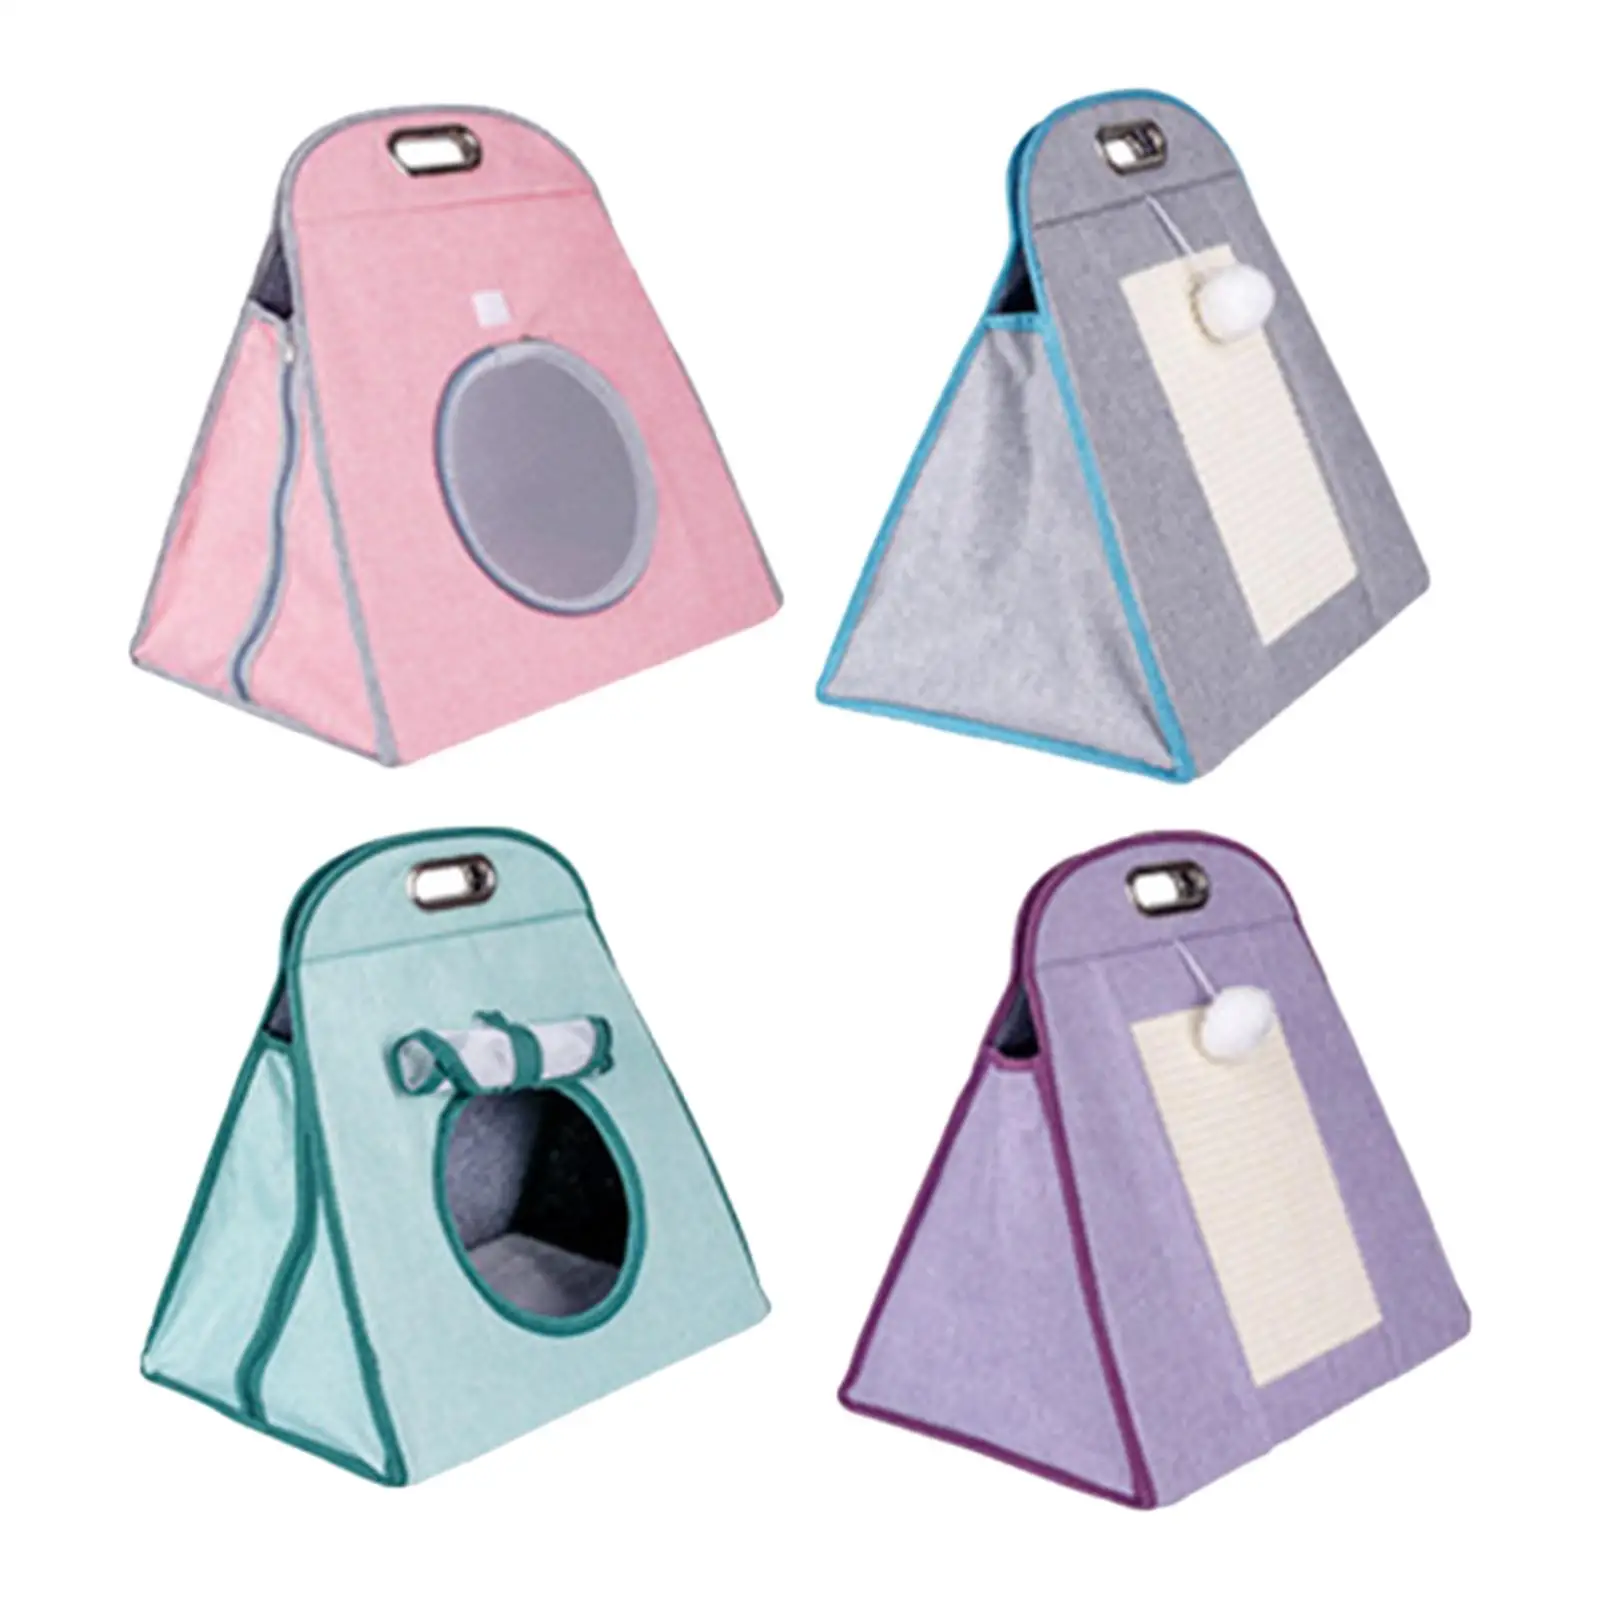 

Cat Carrier Bag Breathable Pet Carriers for Cats and Small Dogs Pets Grooming Shopping